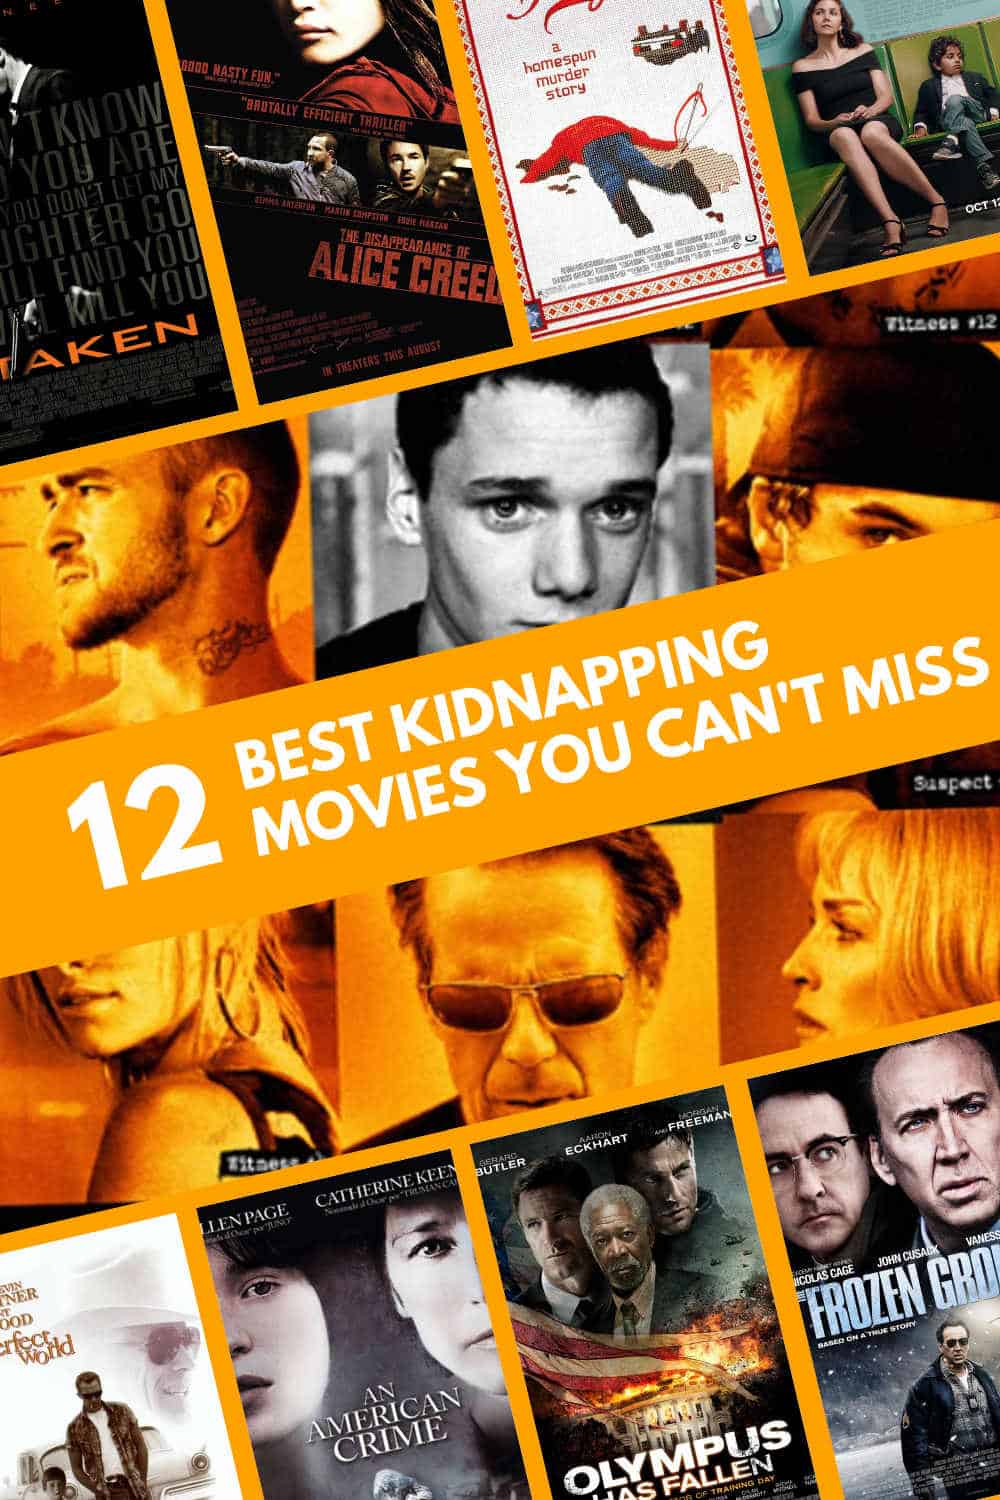 Kidnapping Movie You Can't Miss